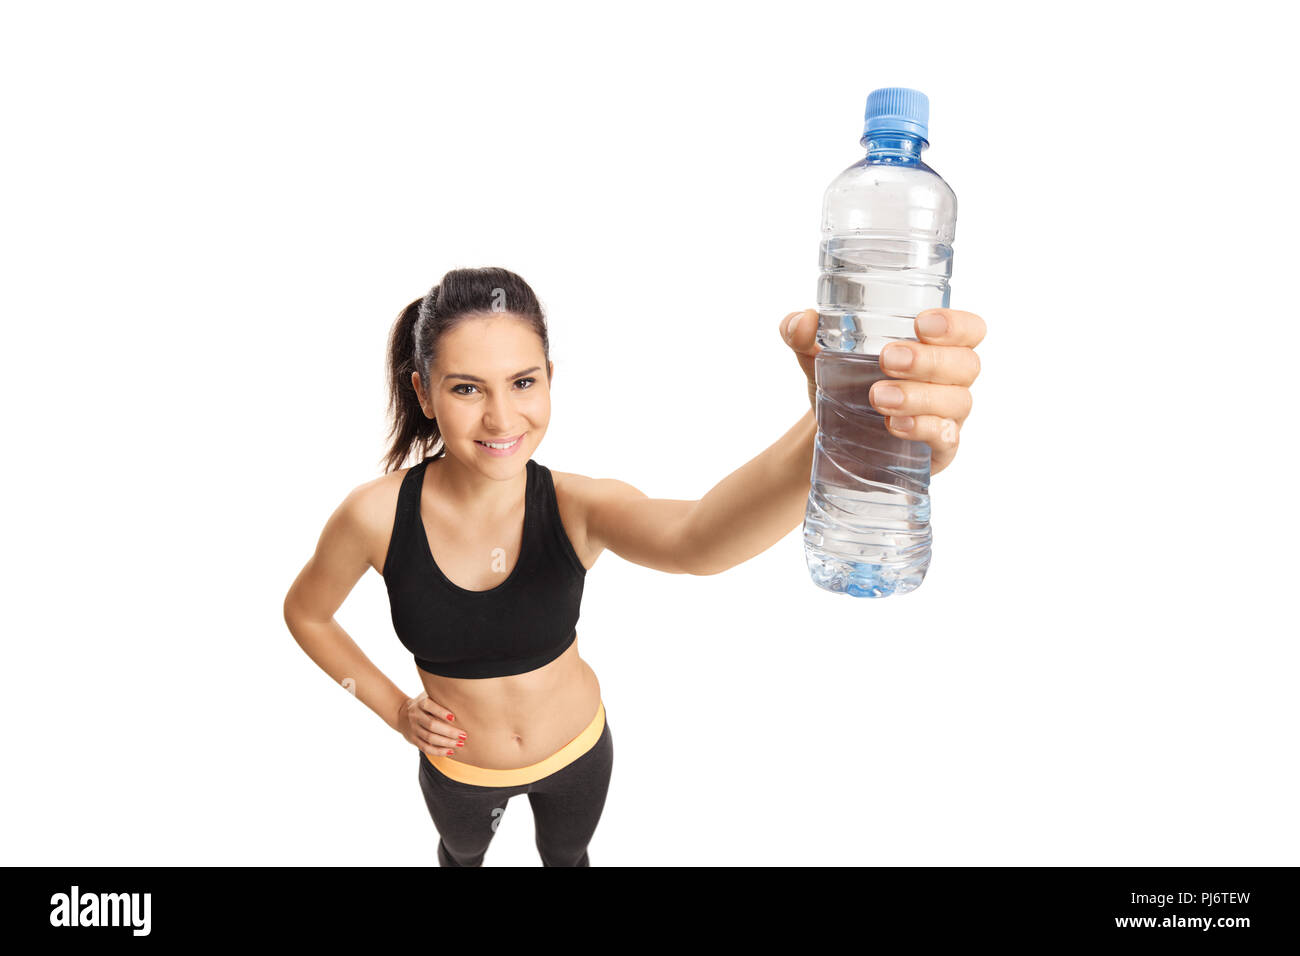 Young smiling female in sport clothing holding a botle of water isolated on white background Stock Photo